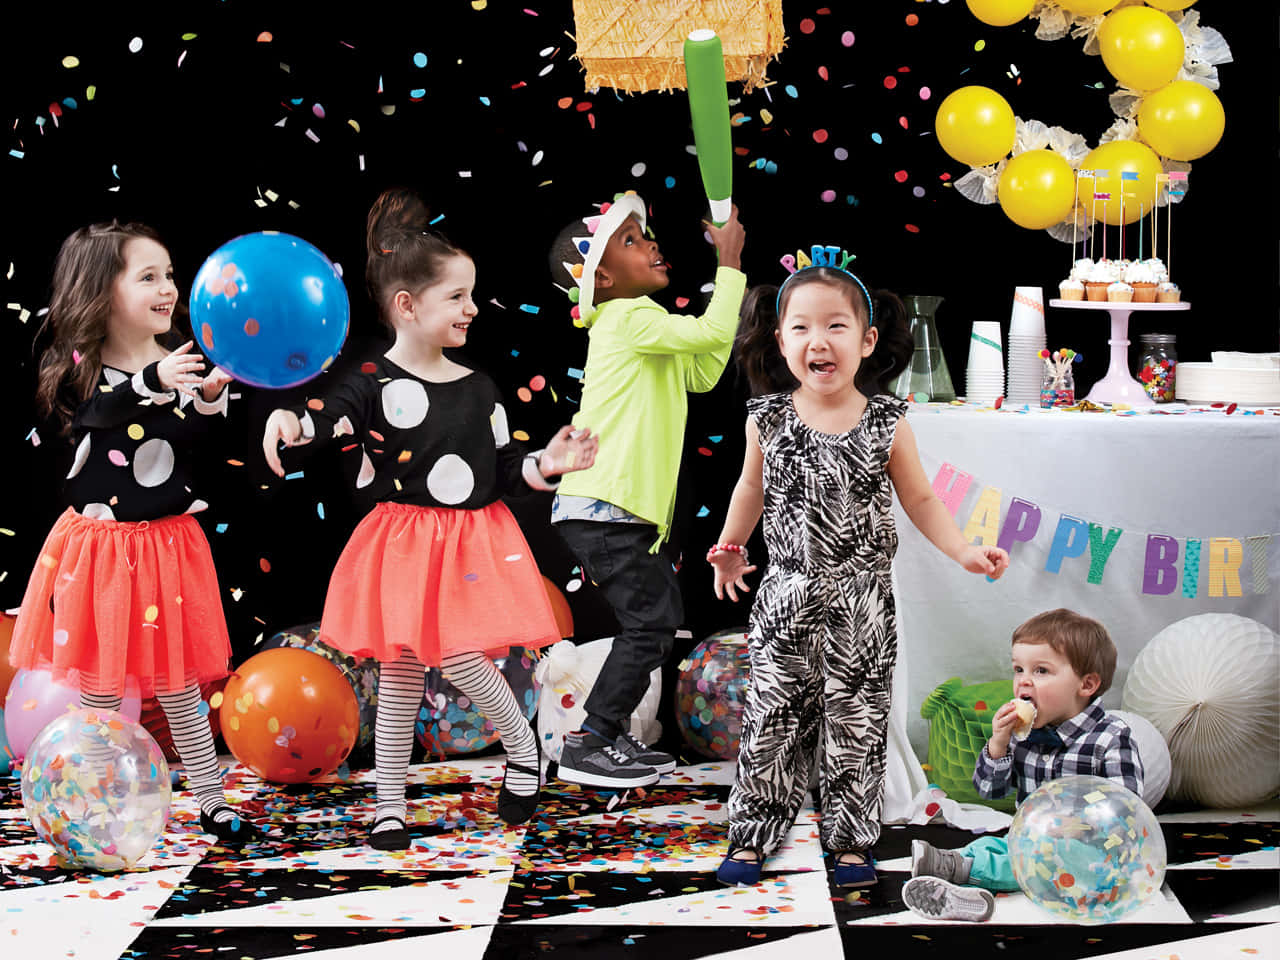 A Group Of Children Playing With Balloons And Confetti